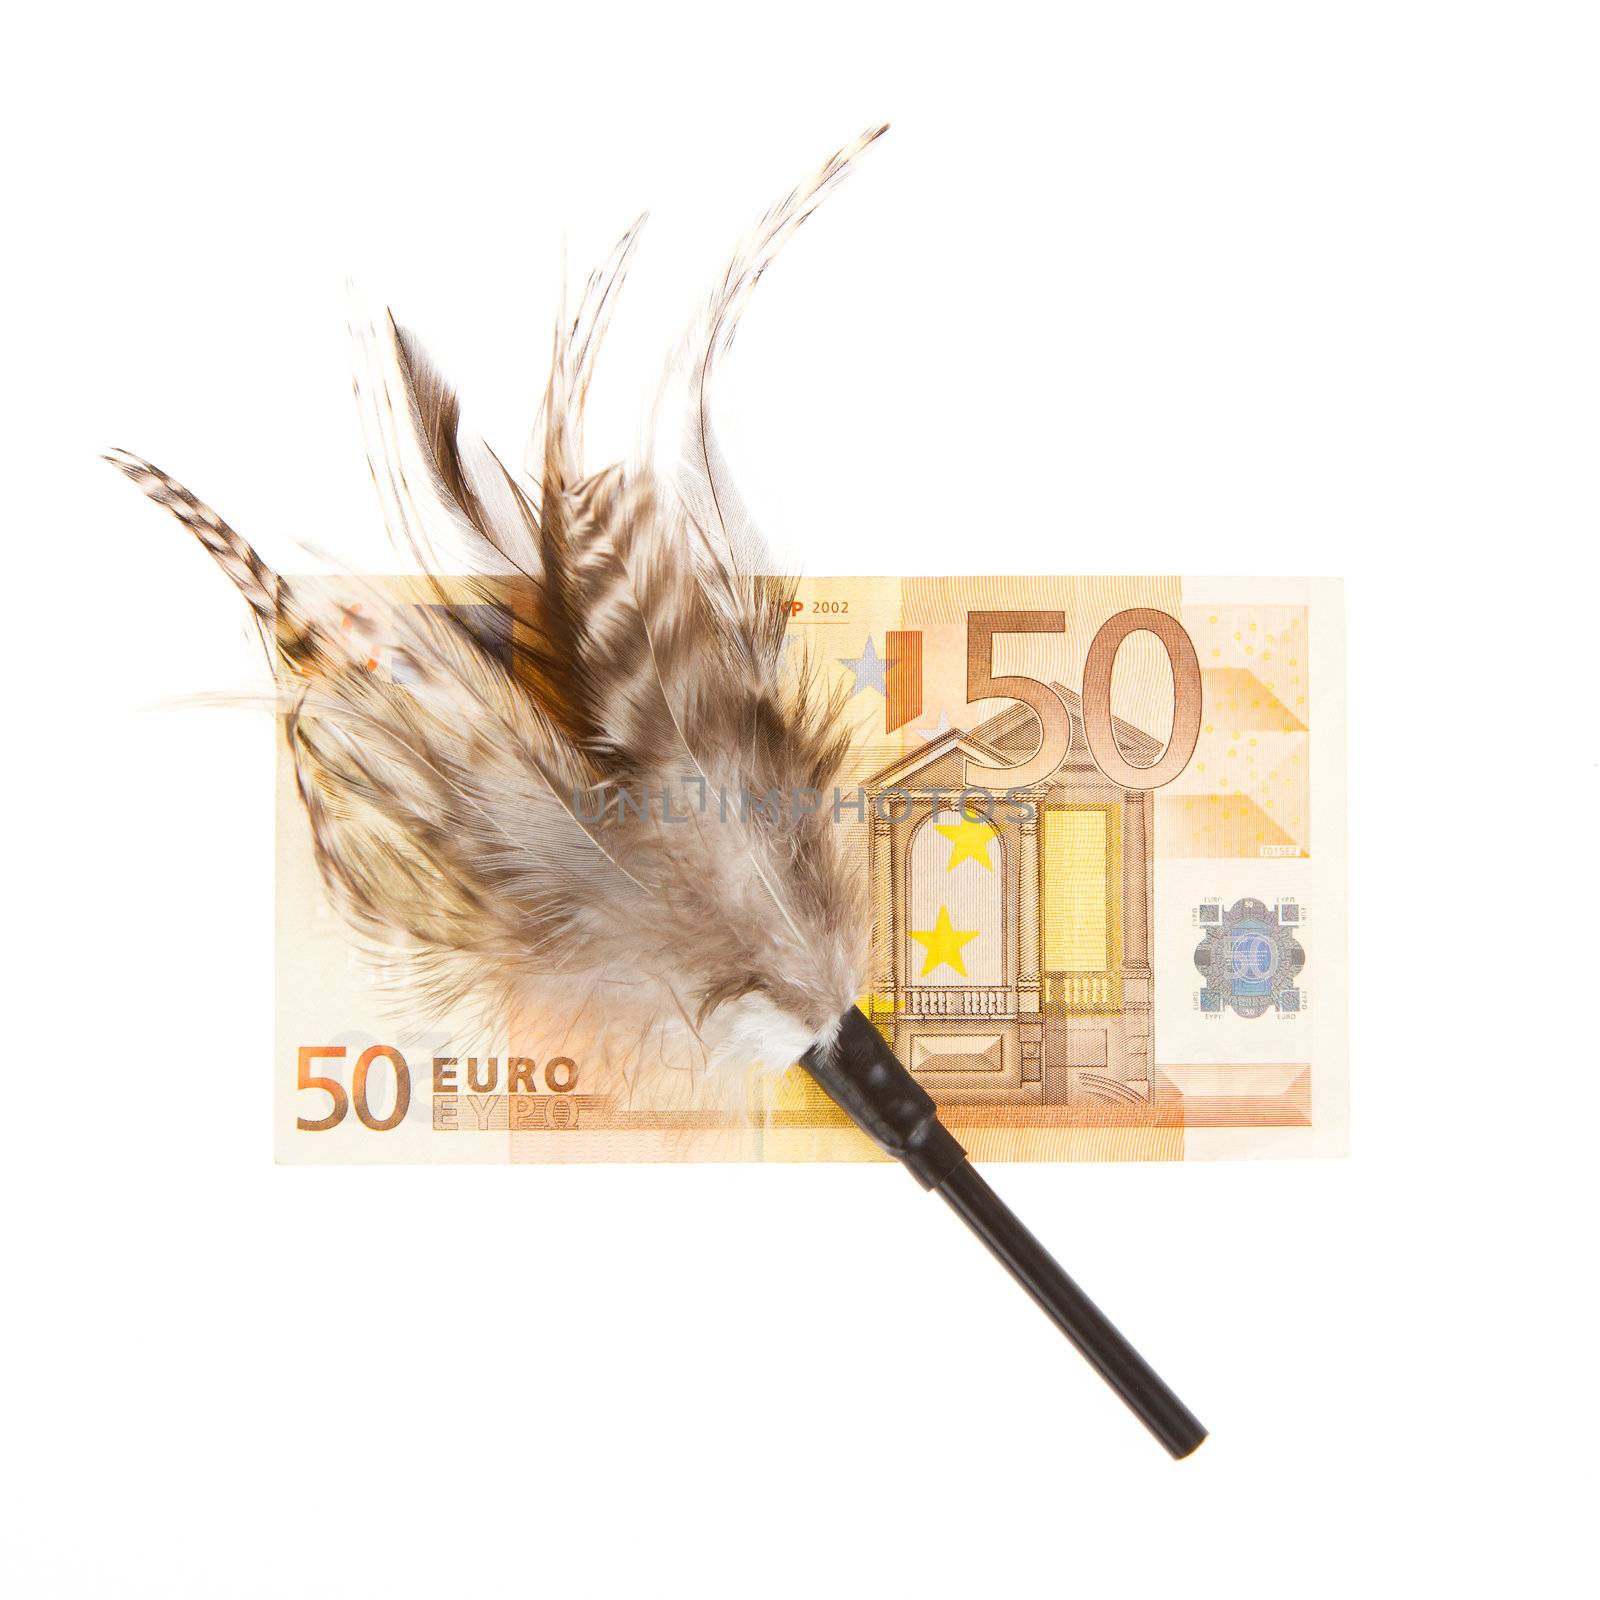 Feathers for teasing with money, isolated on white, prostitution